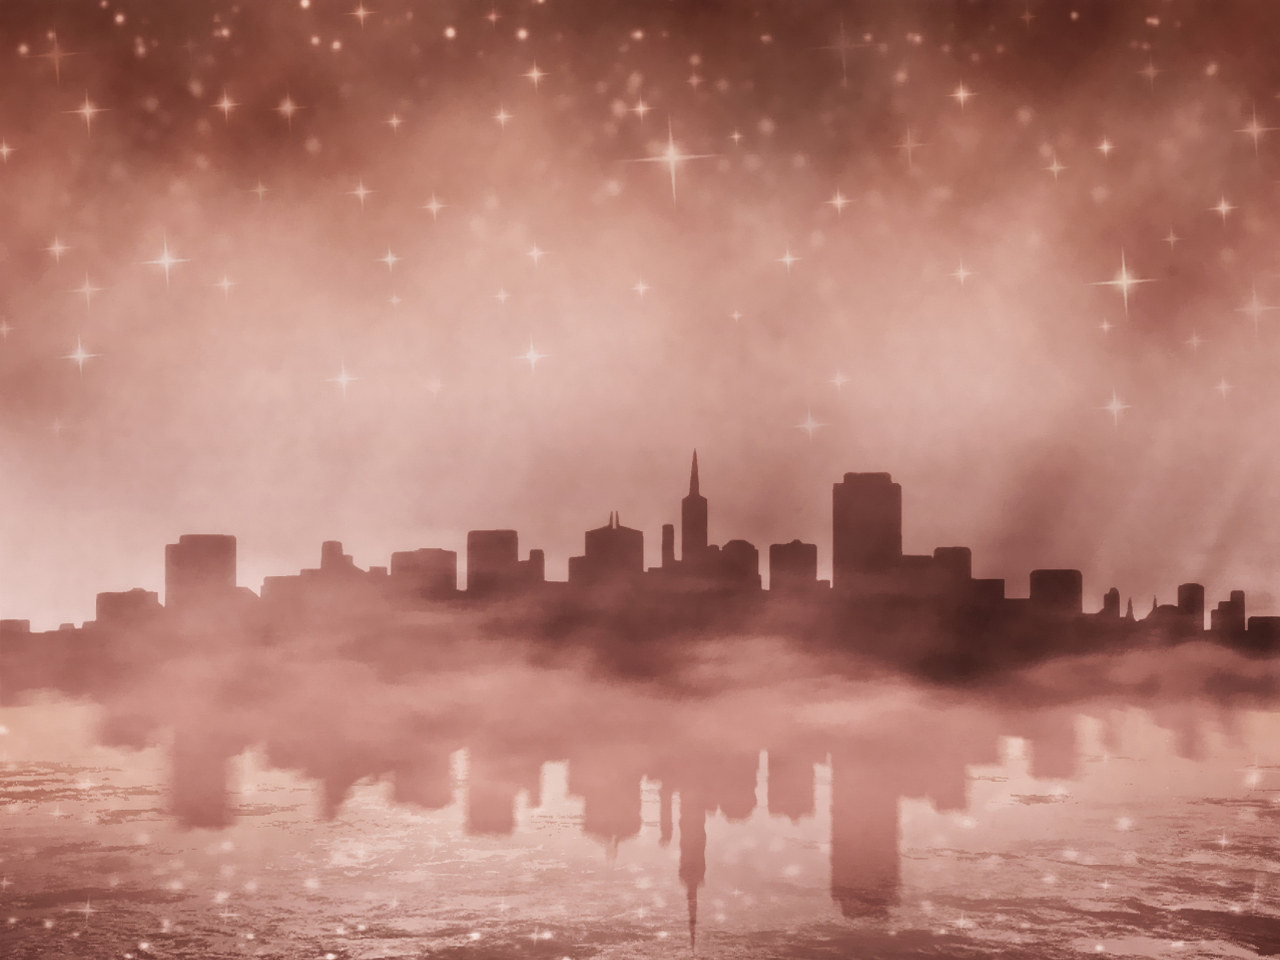 city-at-night-backgrounds-140888 - sepia.jpg